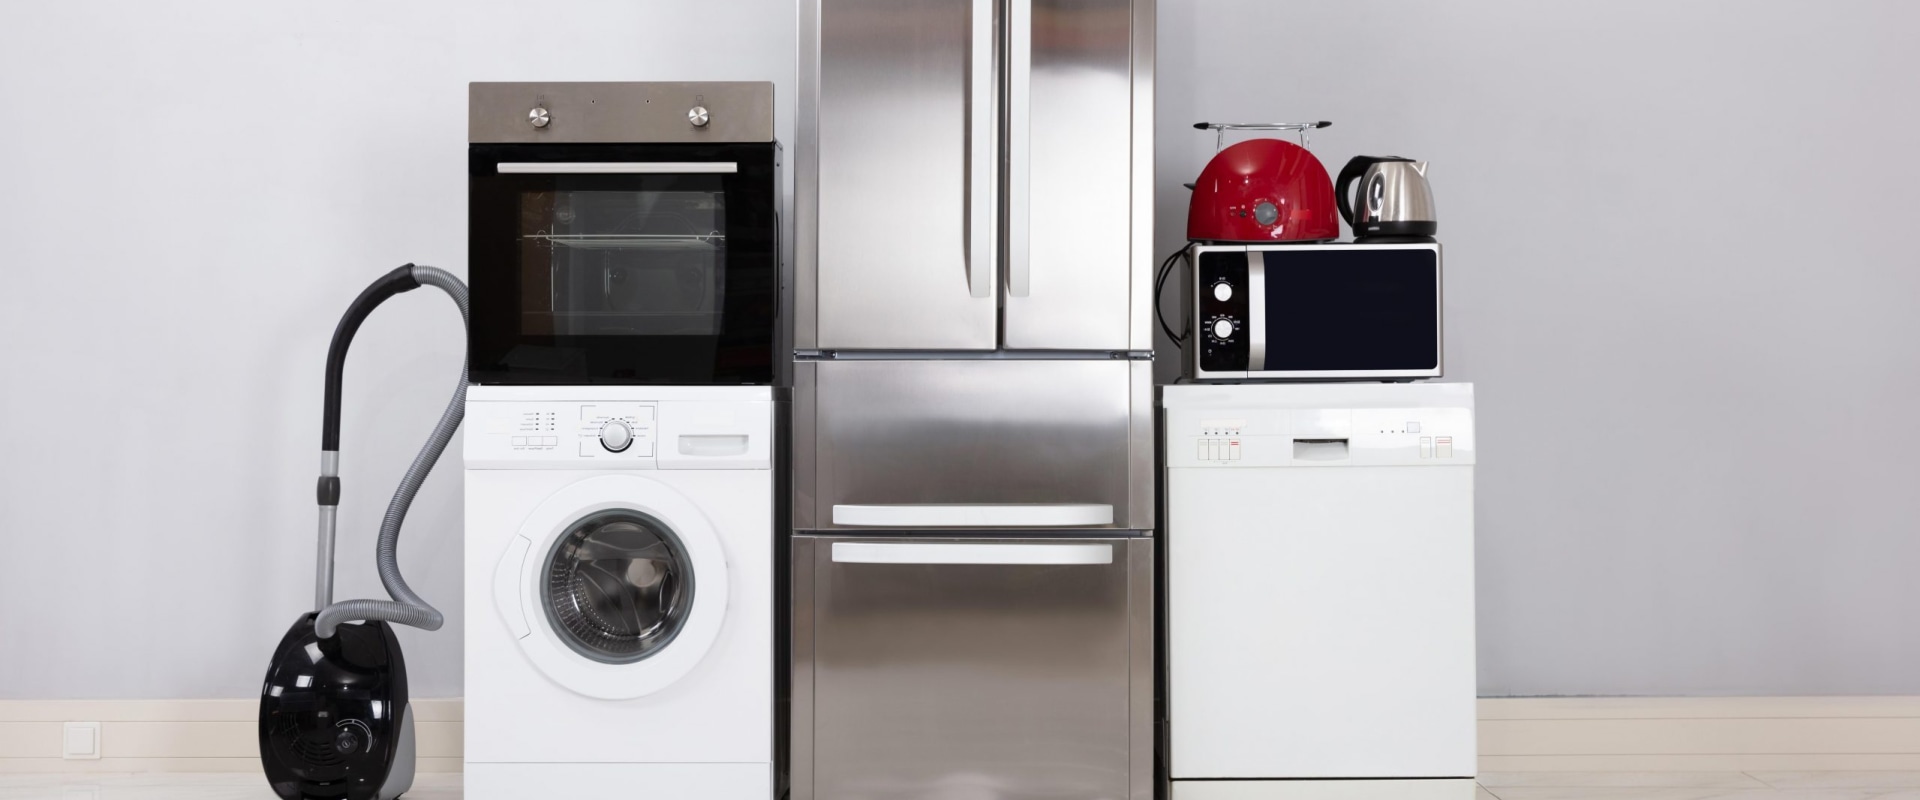 What is the name of kitchen appliances?